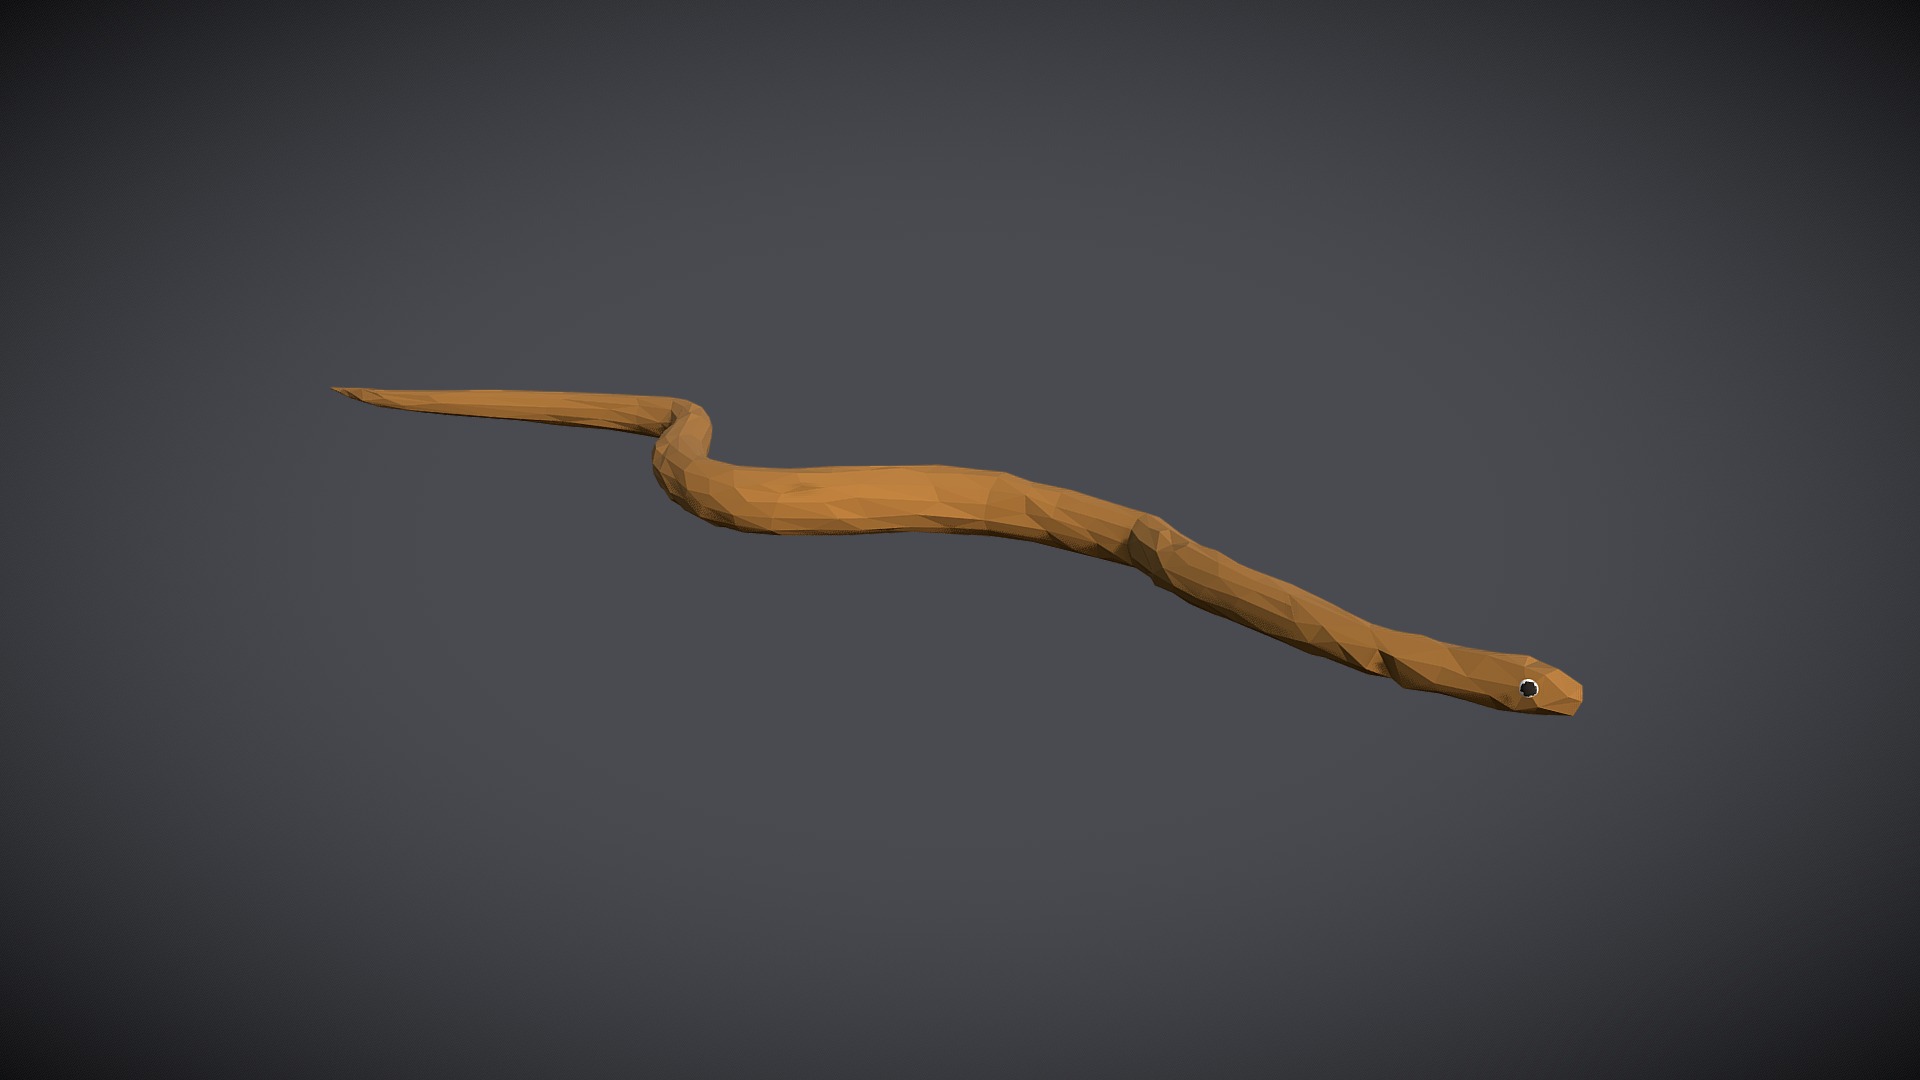 3D model Low-Poly Snake - This is a 3D model of the Low-Poly Snake. The 3D model is about a yellow pencil on a black background.